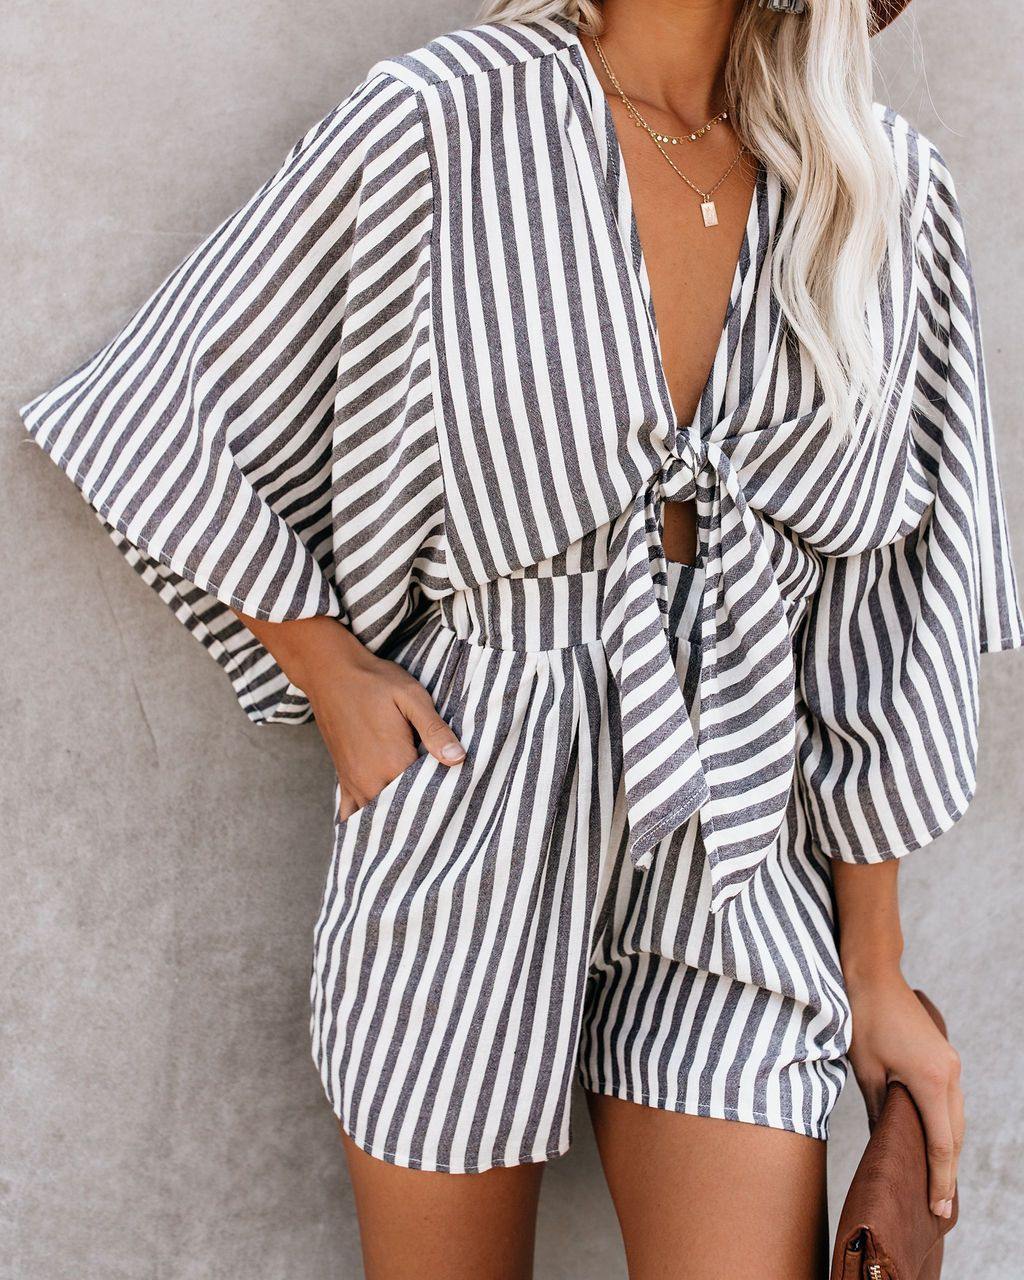 Summer High Waist Short Jumpsuits-One Piece Suits-The same as picture-S-Free Shipping Leatheretro